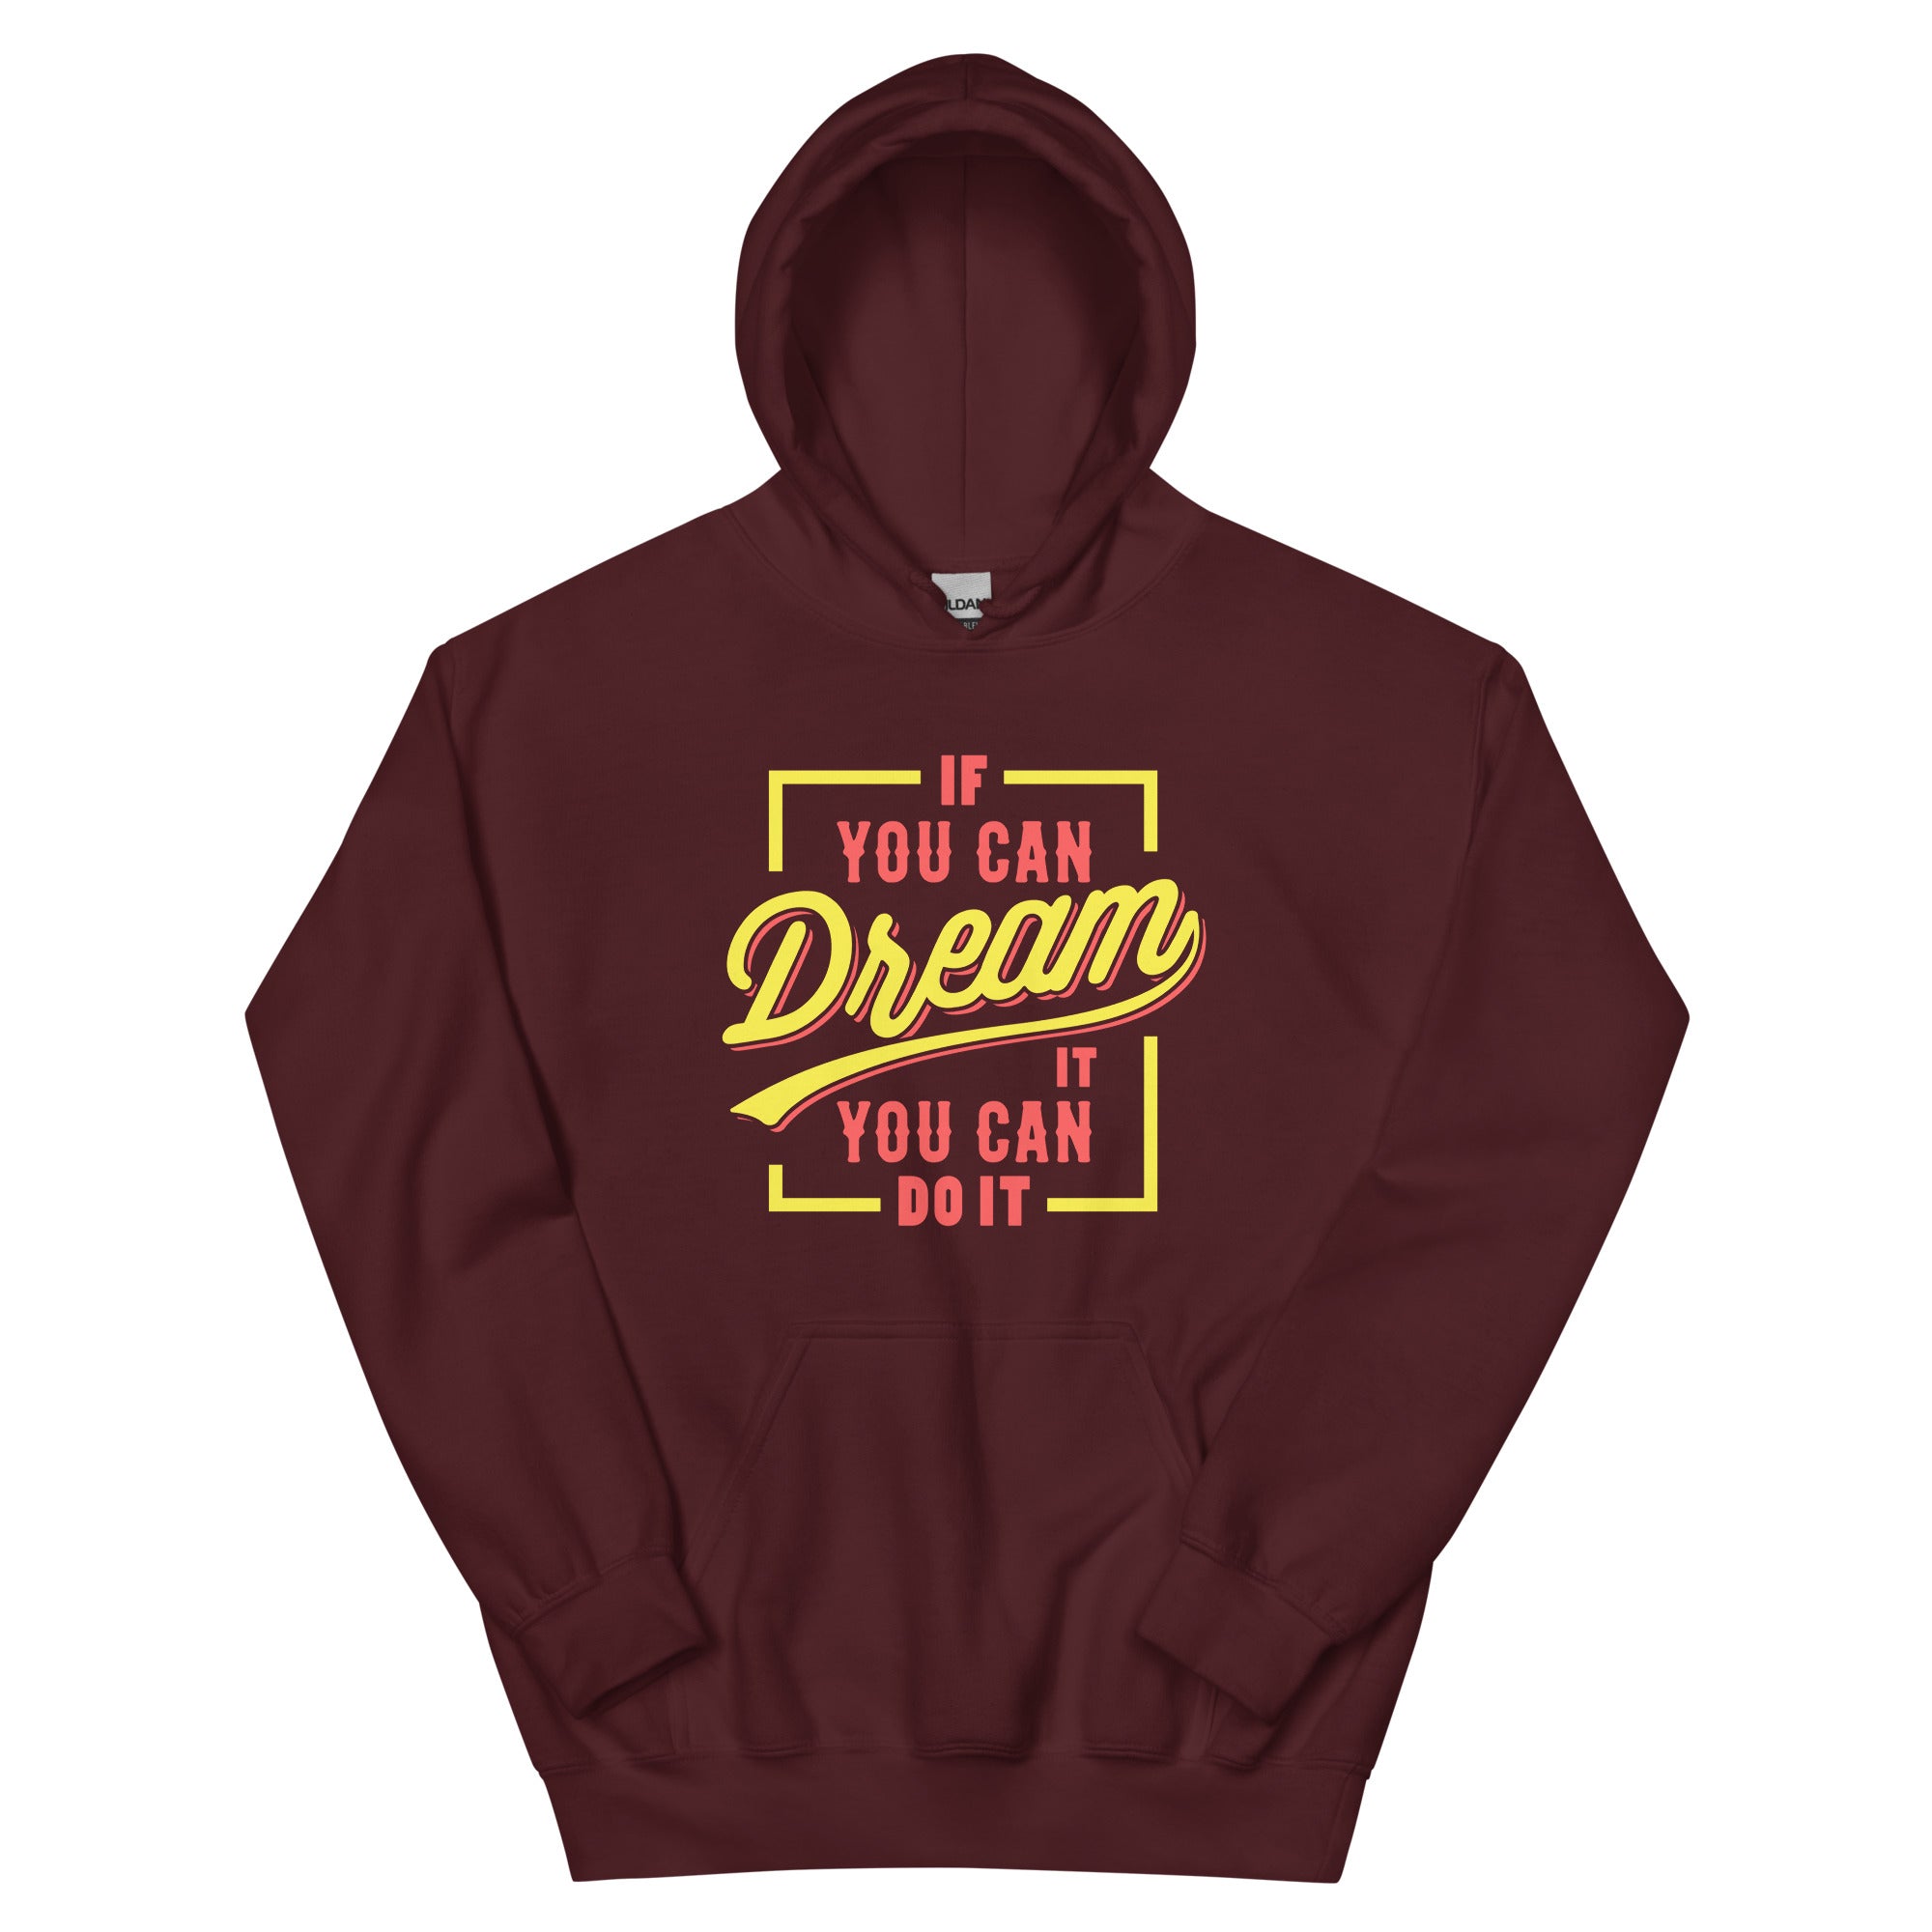 If You Can Dream It, You Can Do It - Unisex Hoodie